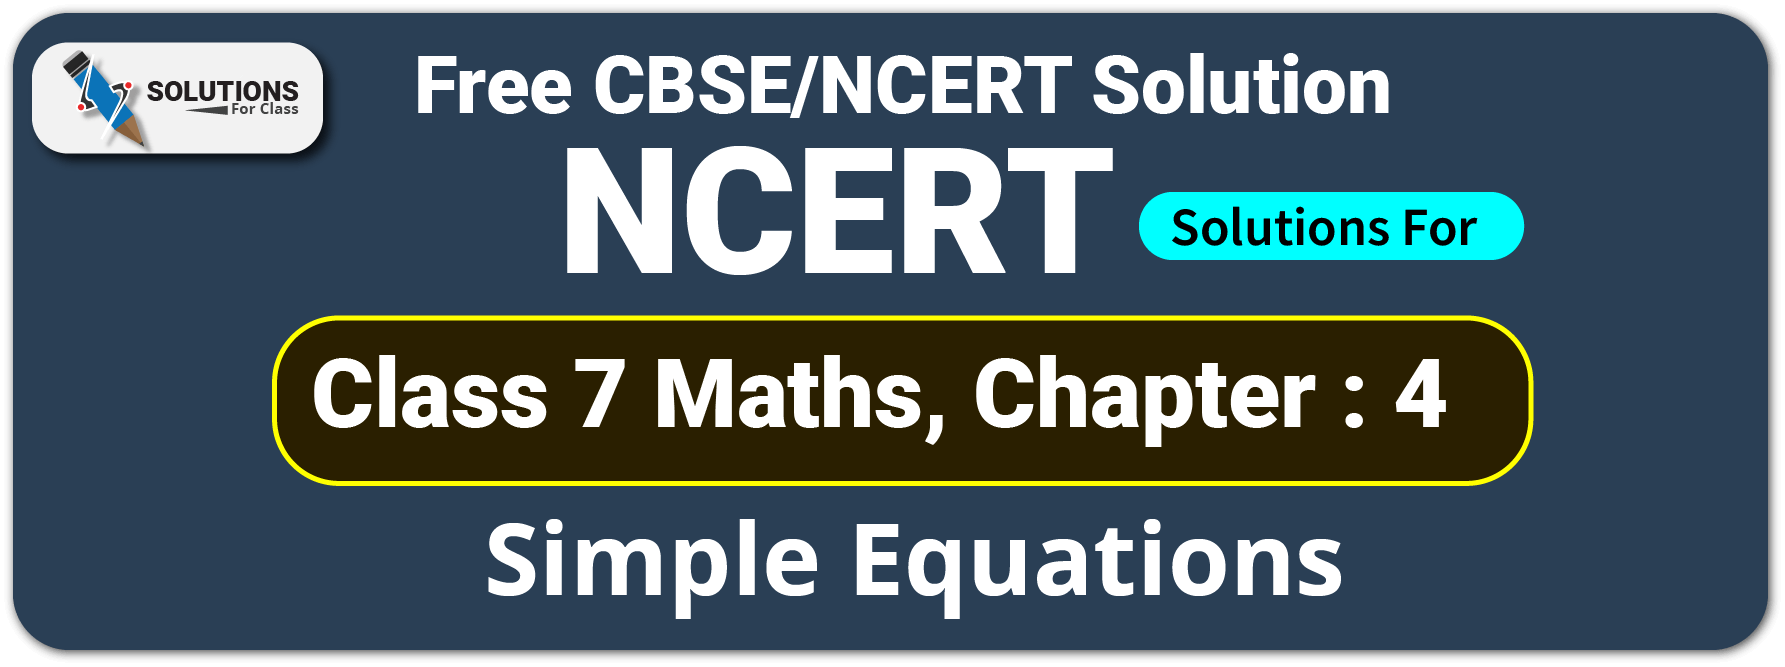 NCERT Solutions For Class 7 Maths Chapter 4, Simple Equations